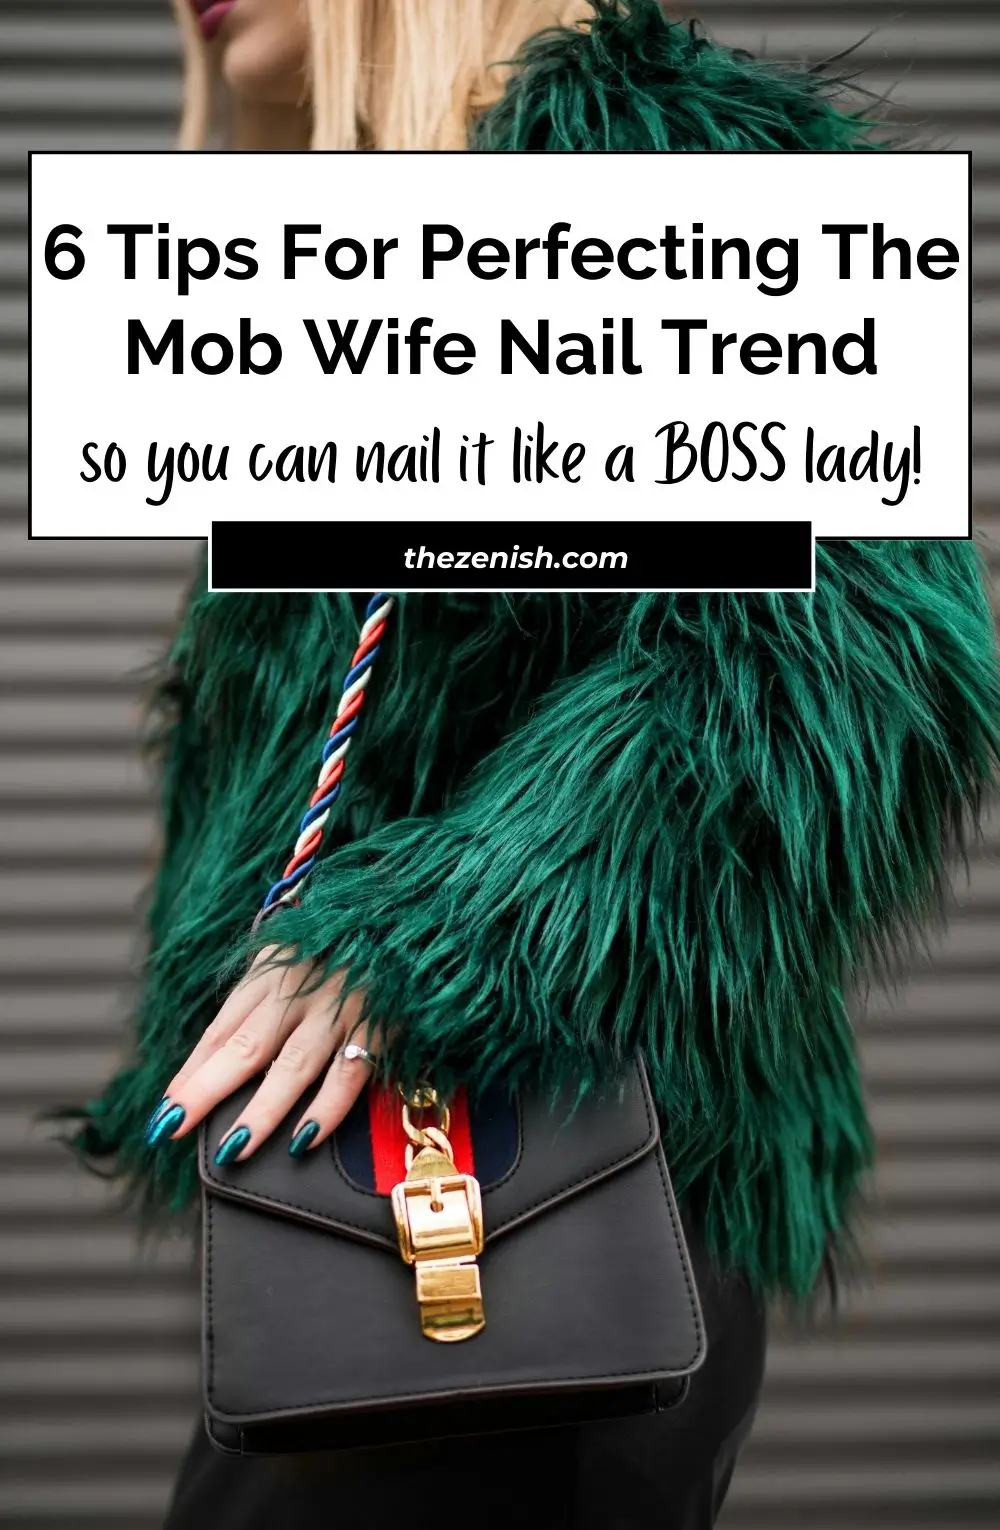 6 Tips for Perfecting the 'Mob Wife' Nails Trend That's Taking Over Social Media 3 6 Tips for Perfecting the 'Mob Wife' Nails Trend That's Taking Over Social Media